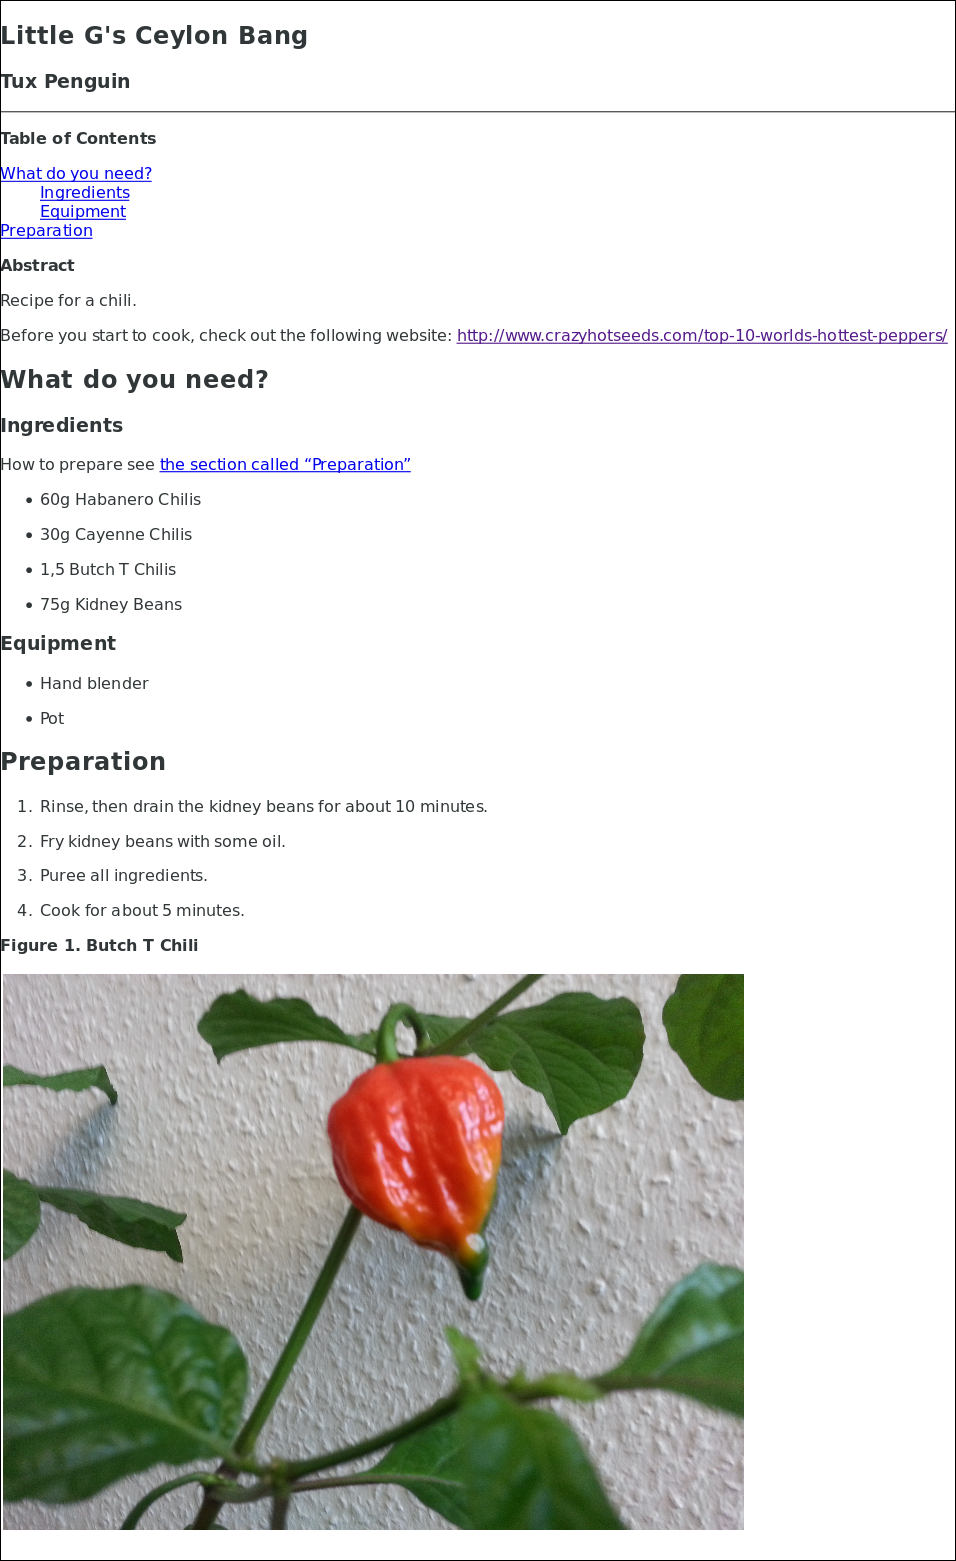 The Goal: Publishing a Recipe for a Chili Sauce in HTML Format